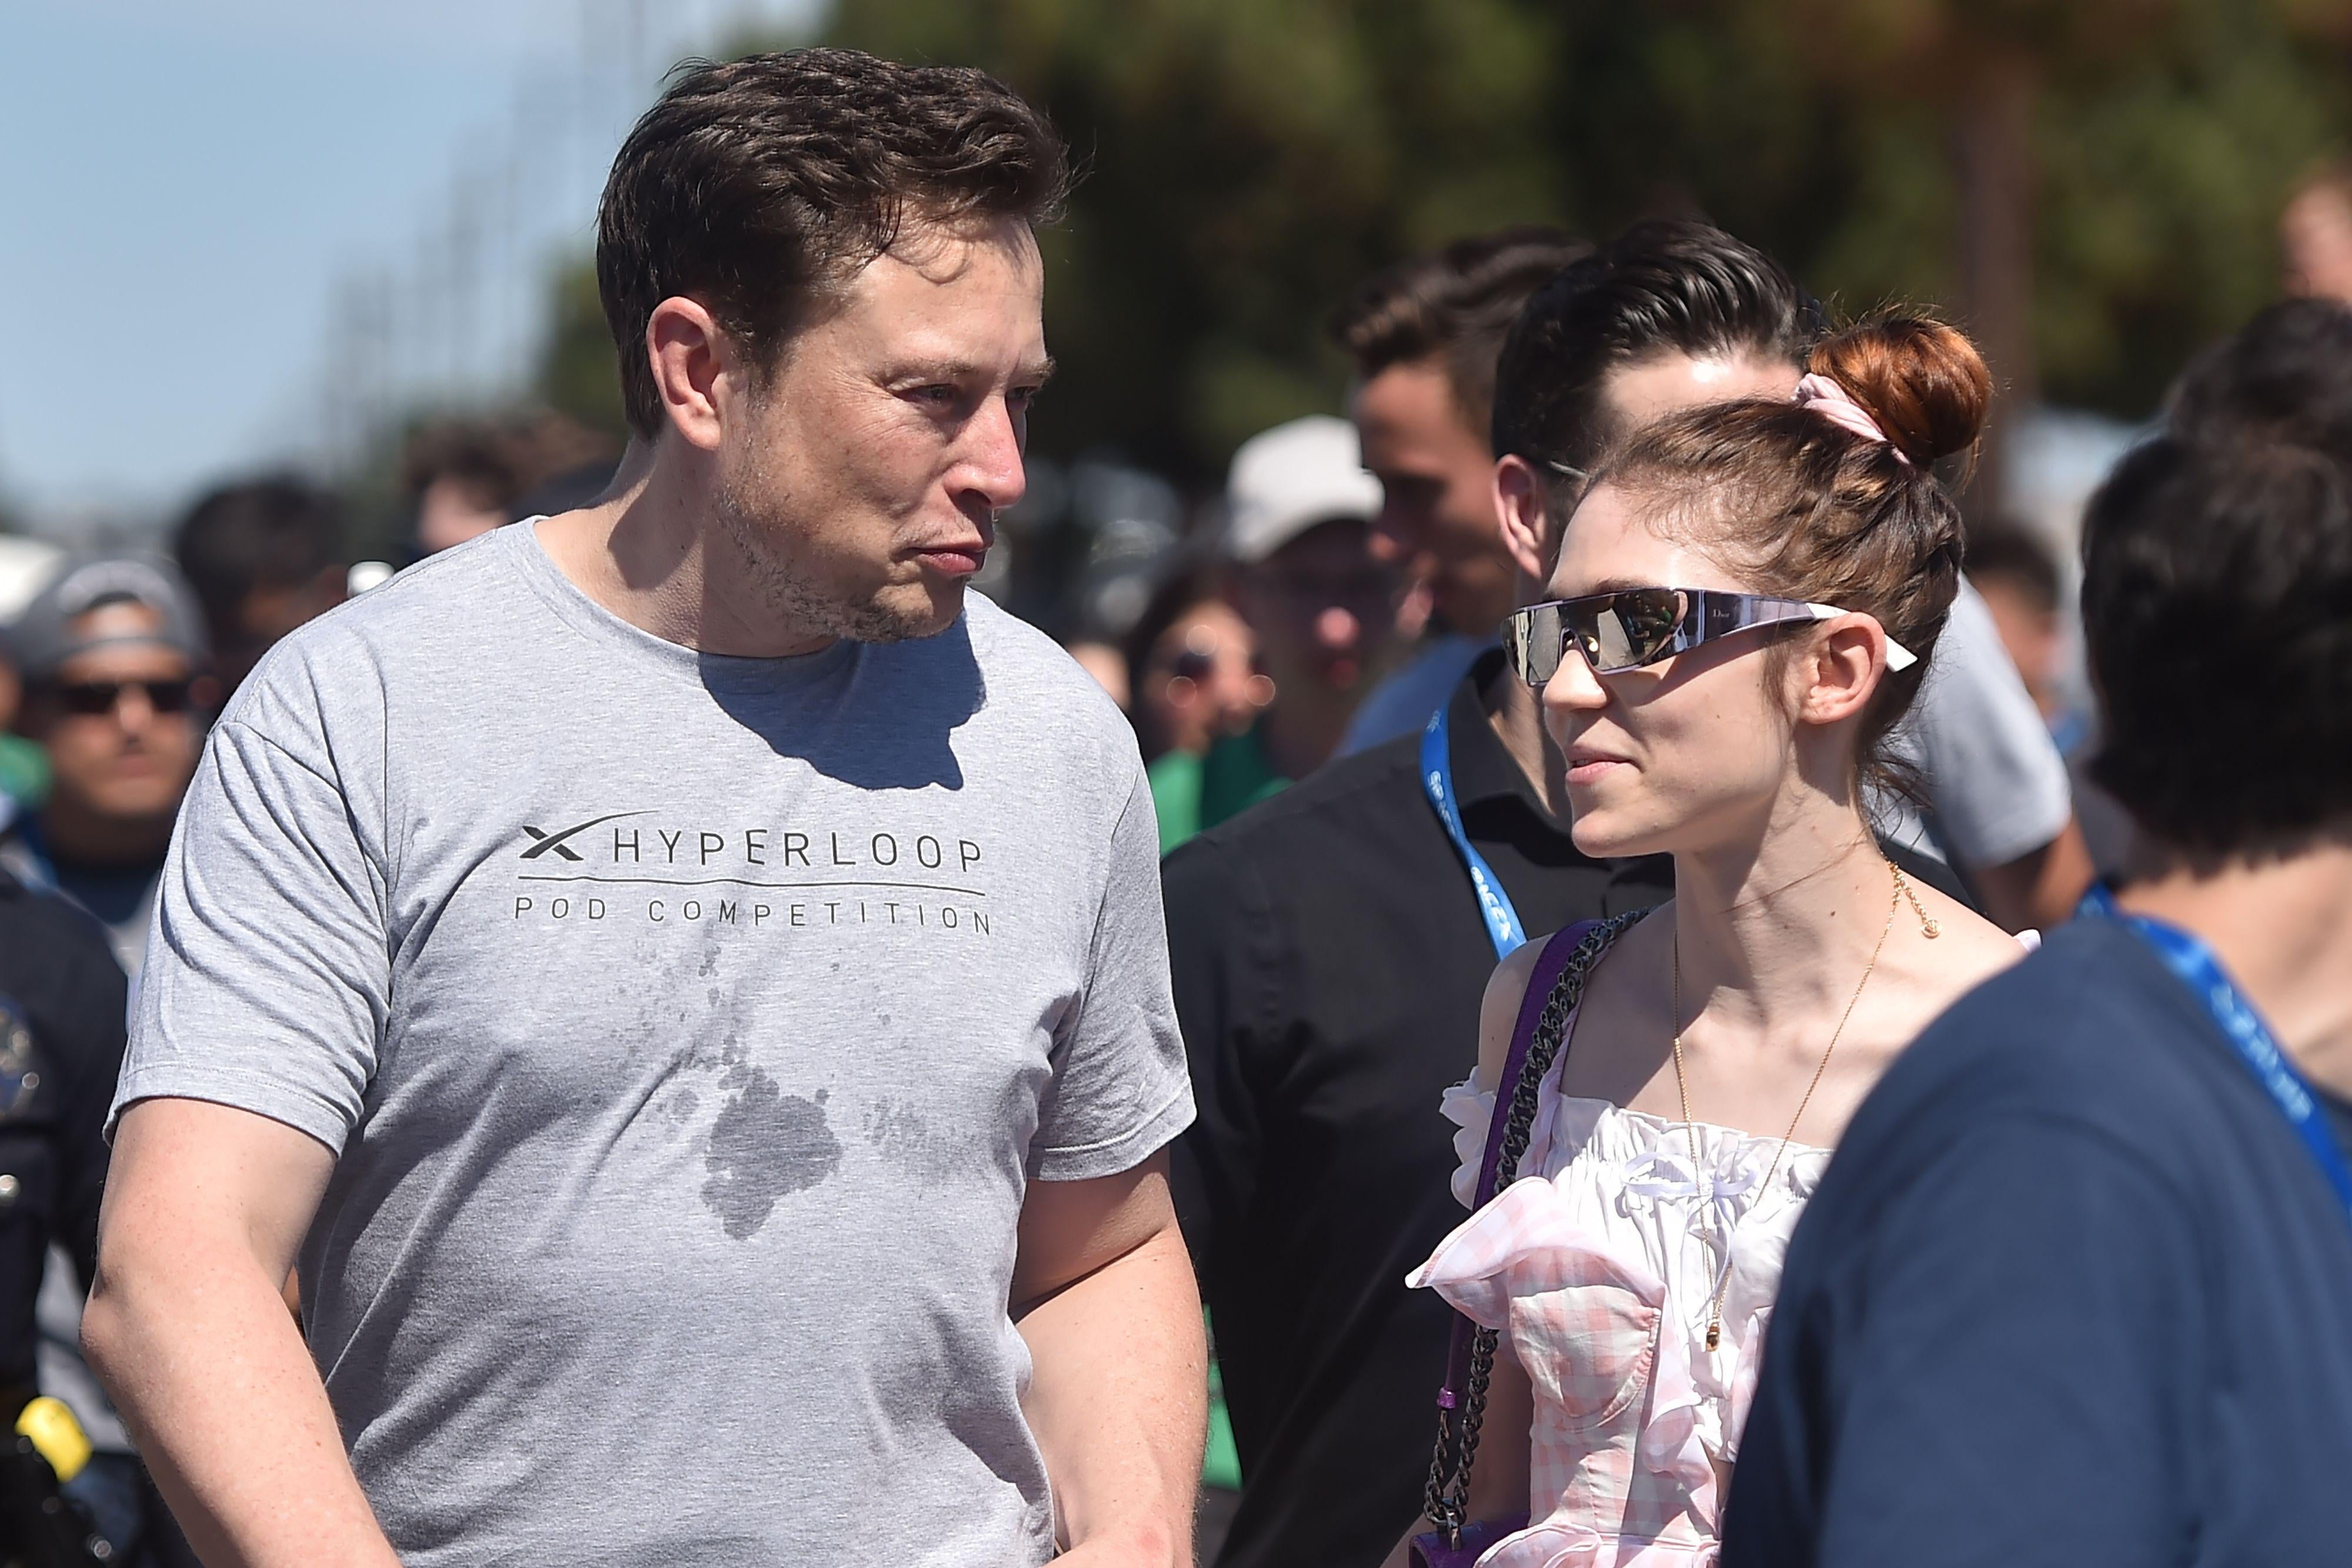 Elon Musk and  Grimes (Claire Boucher) attend the 2018 Space X Hyperloop Pod Competition, in Hawthorne, California, on Sunday.